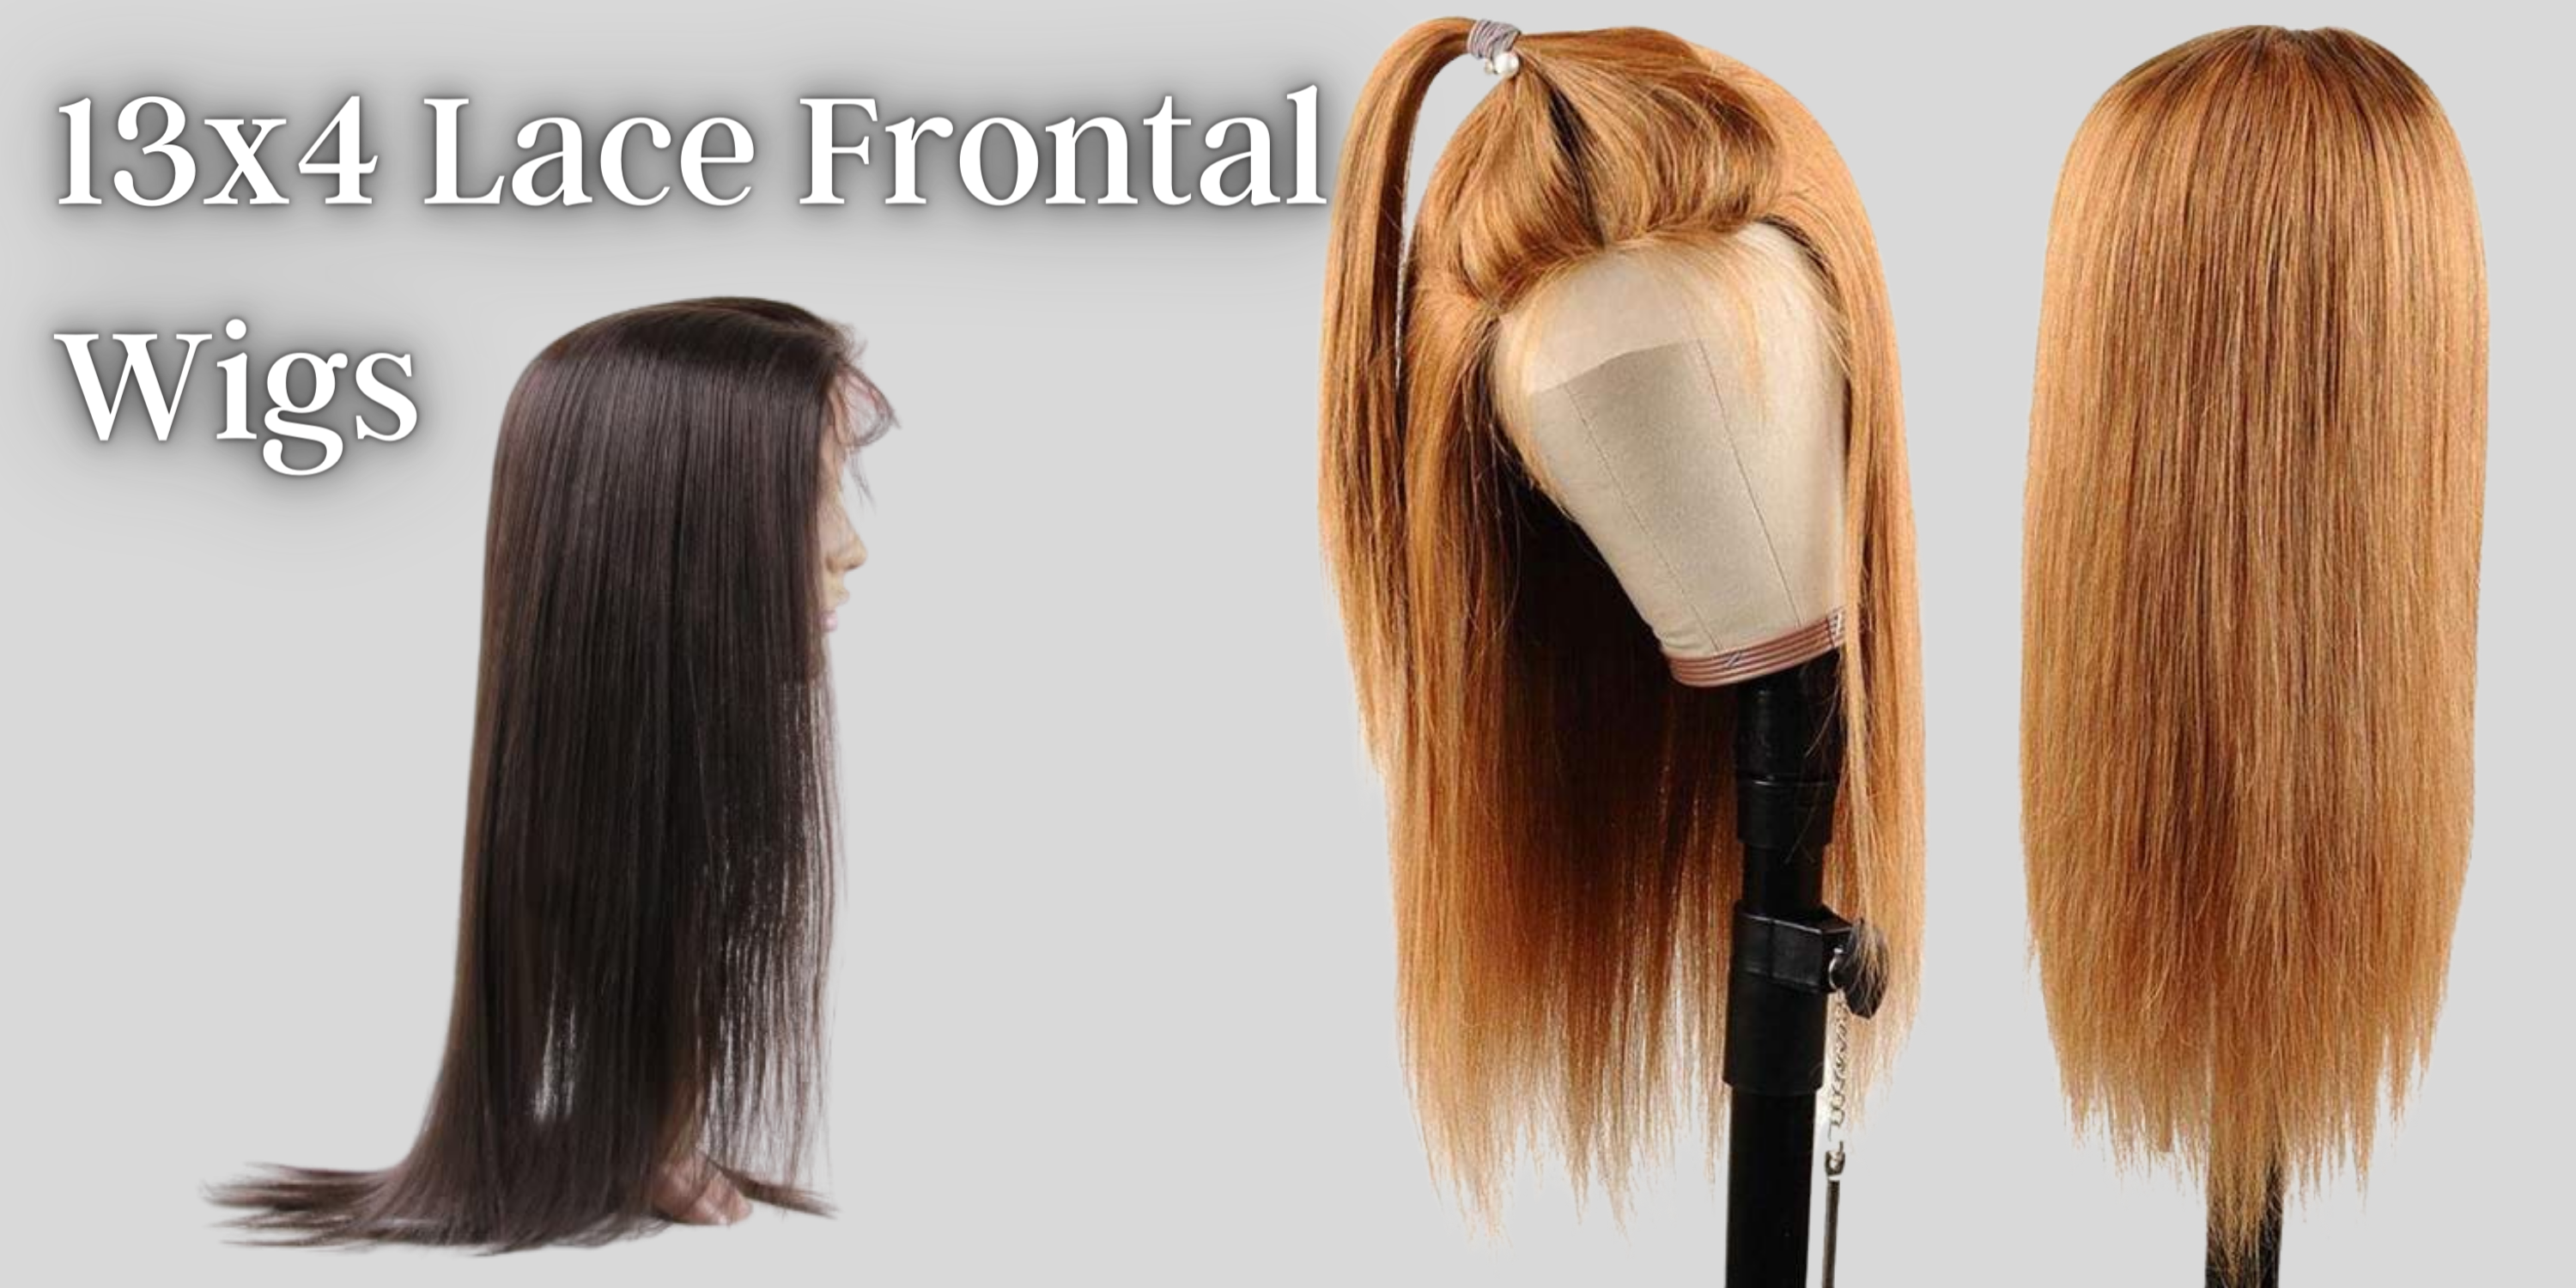 13x4 Lace Frontal Wig: 10 Benefits That May Change Your Perspective